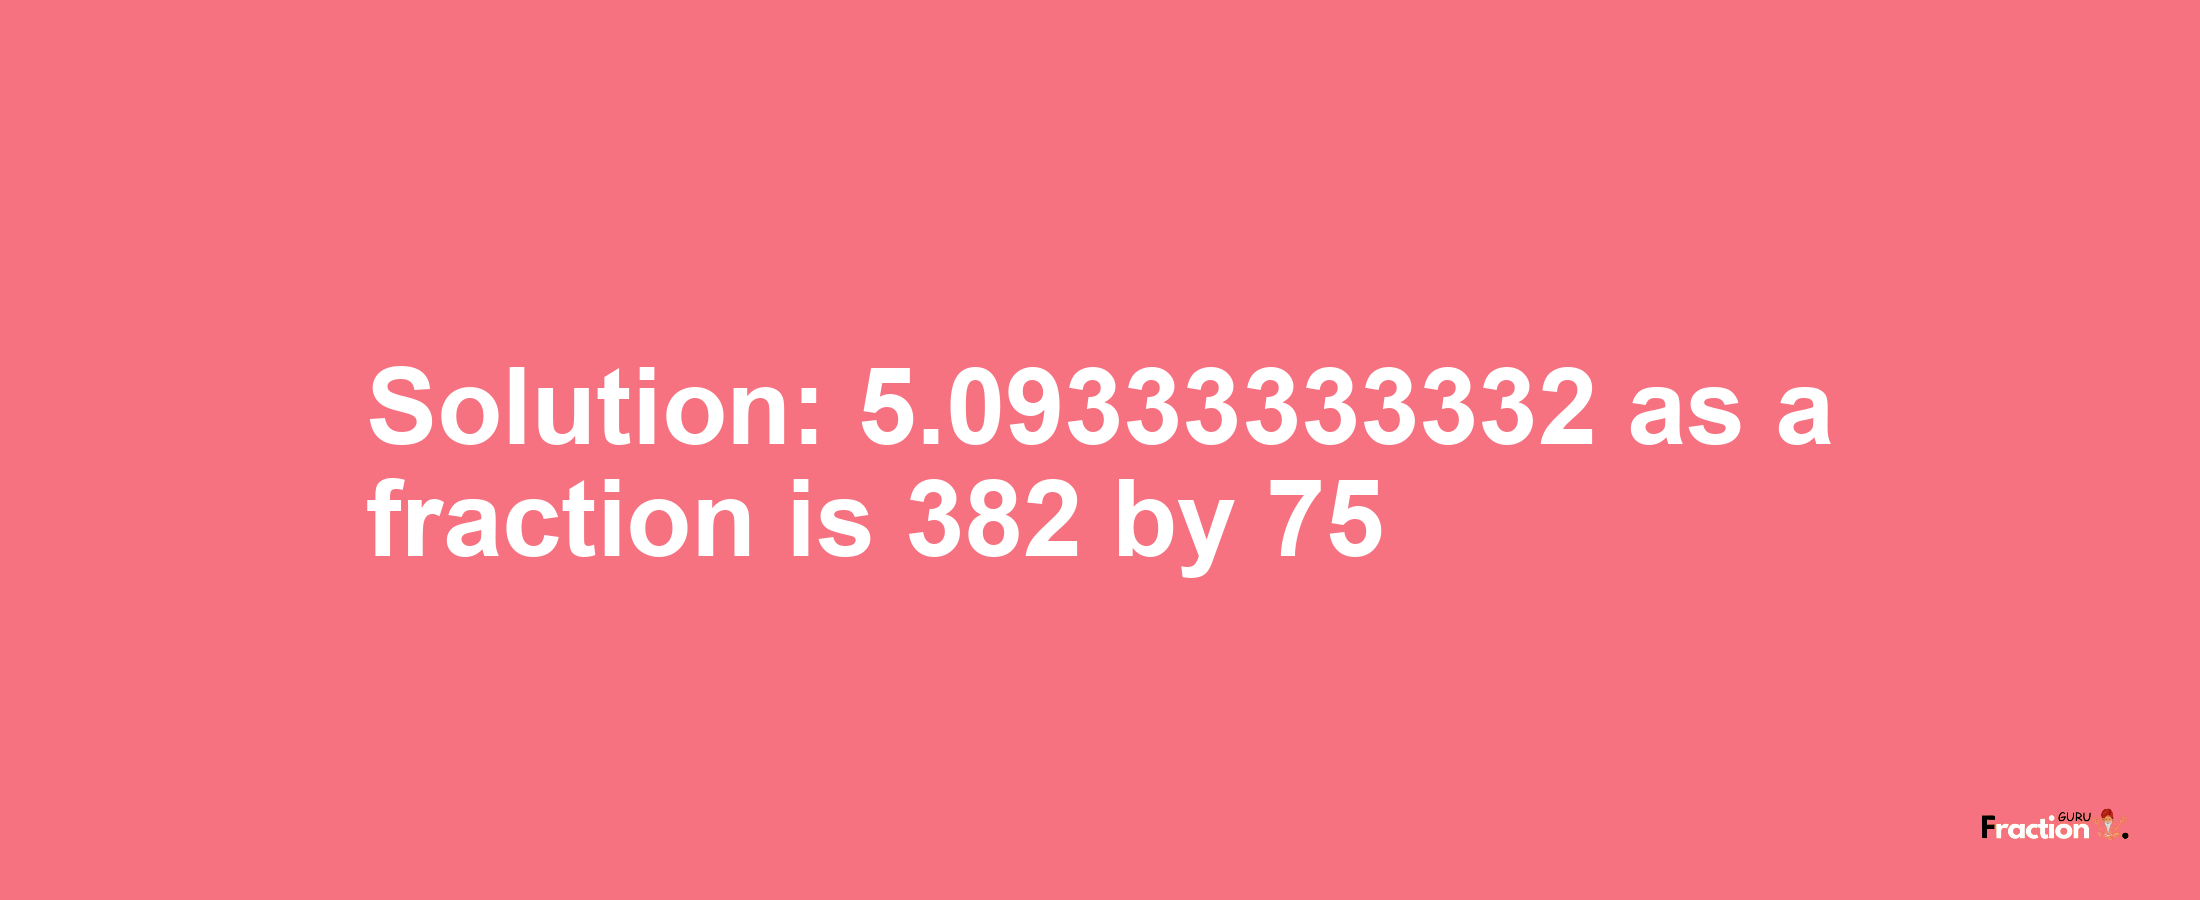 Solution:5.09333333332 as a fraction is 382/75